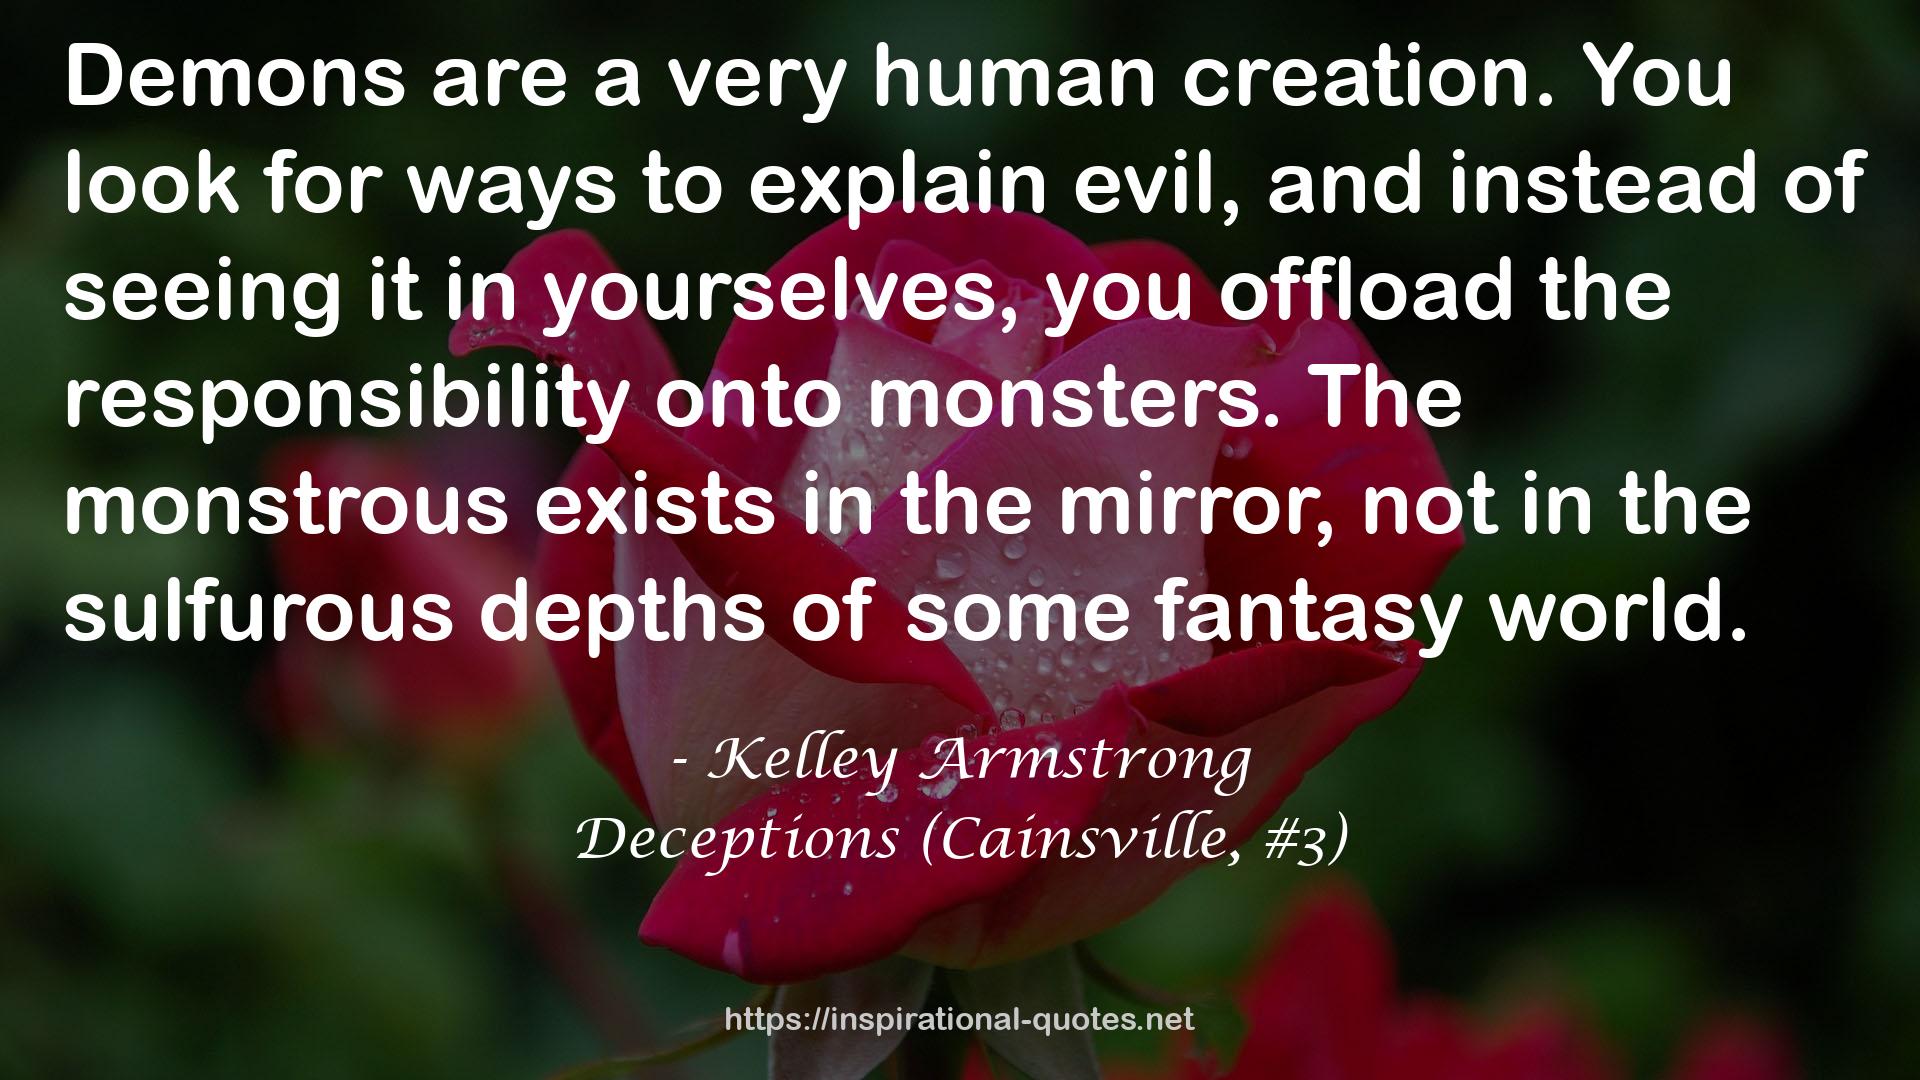 Deceptions (Cainsville, #3) QUOTES